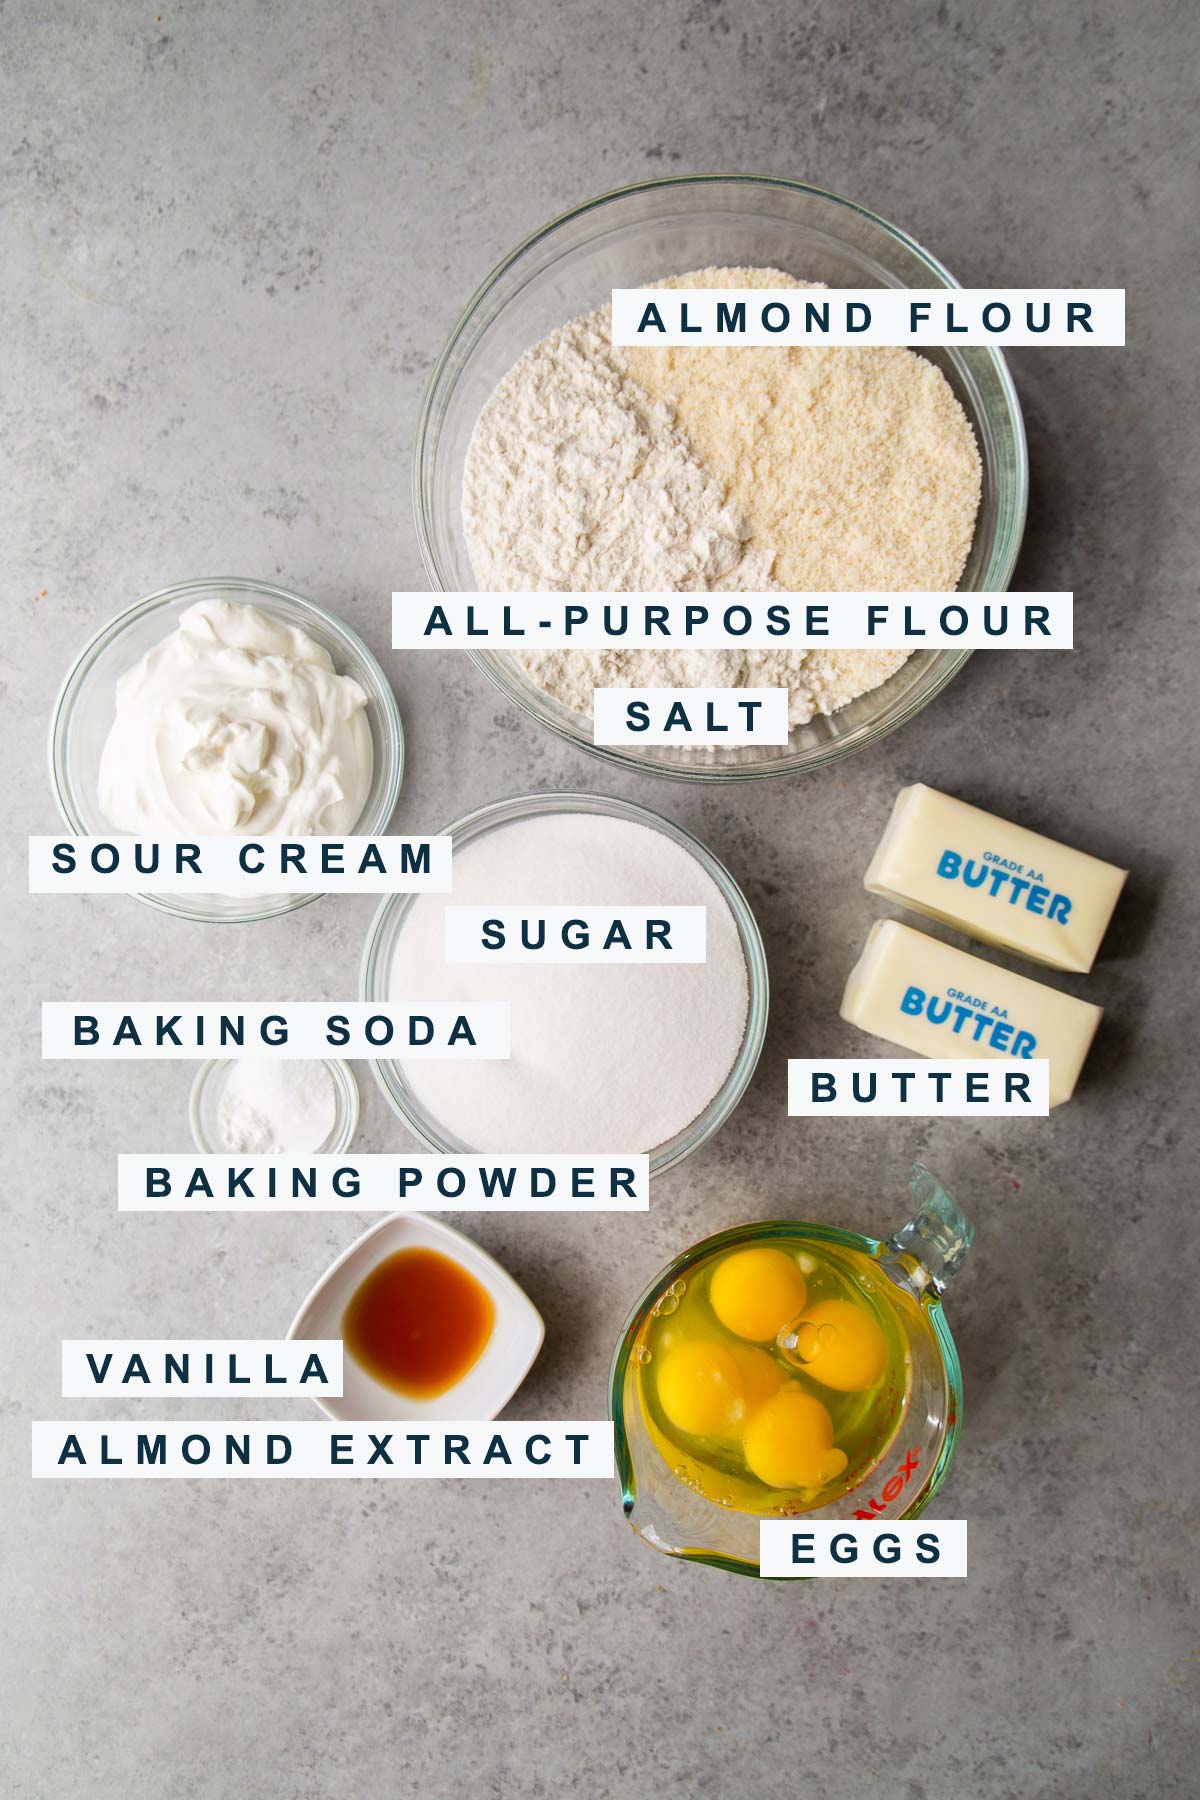 ingredients for almond pound cake include almond flour, eggs, butter, and sour cream.